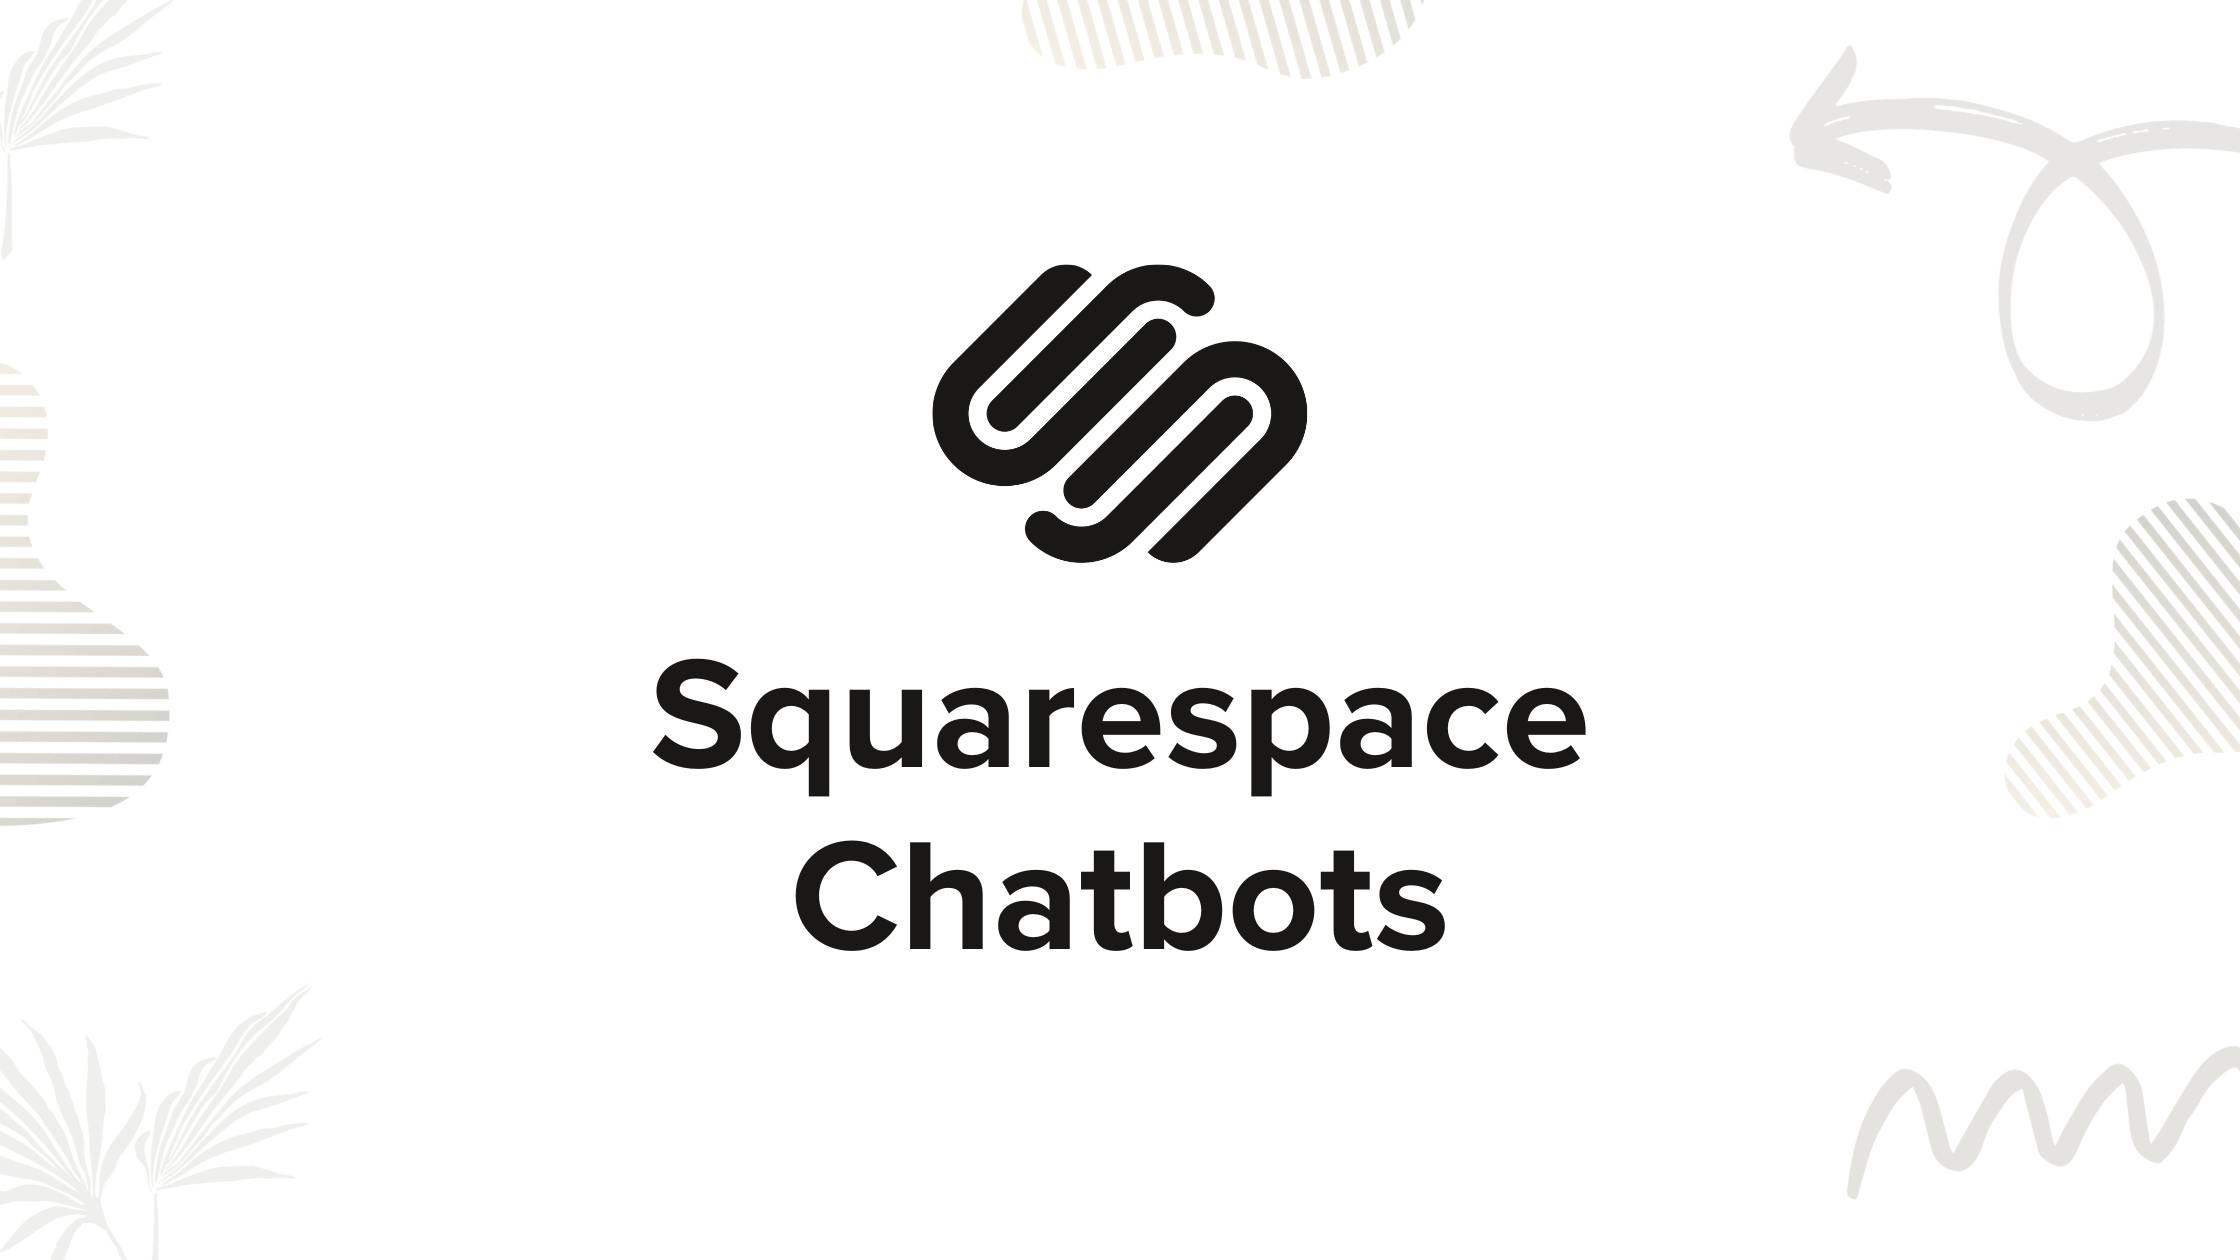 5 Best Chatbots For Squarespace Sites To Automate Your Customer Support